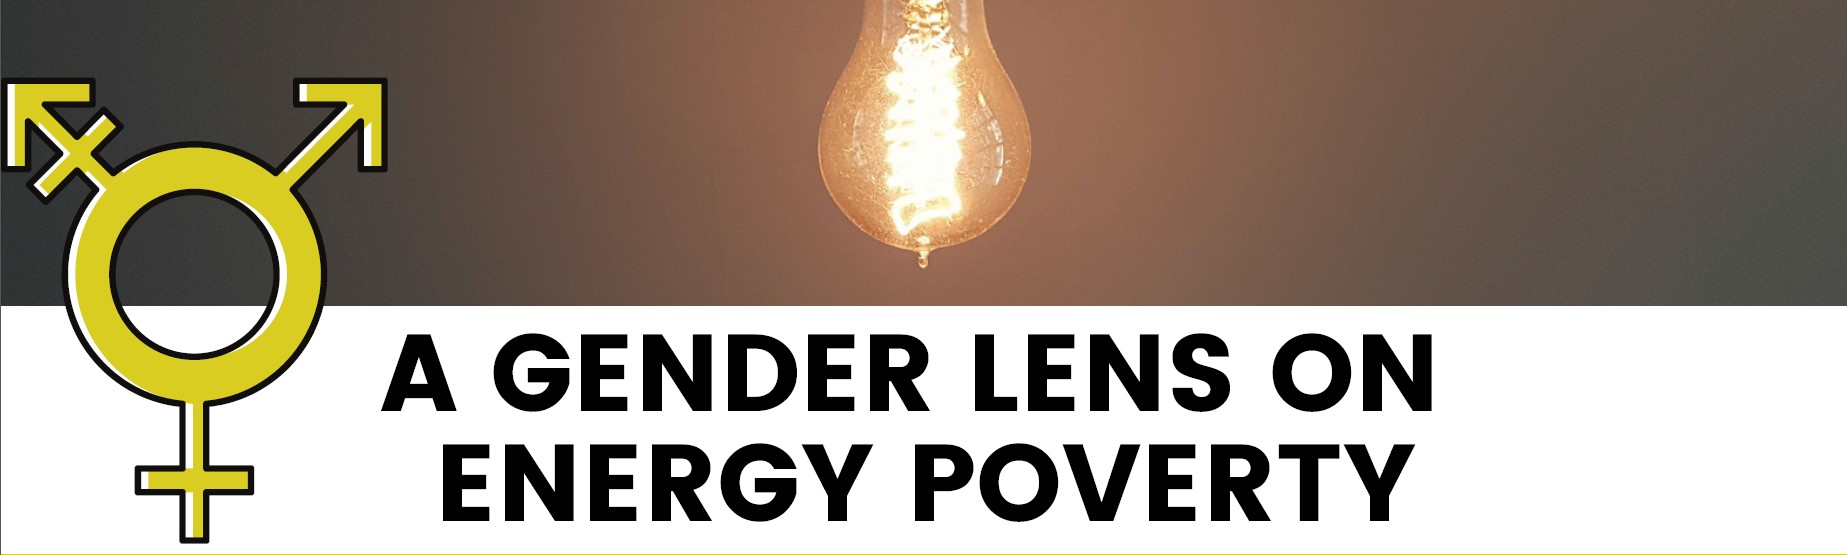 A gender lens on energy poverty Image